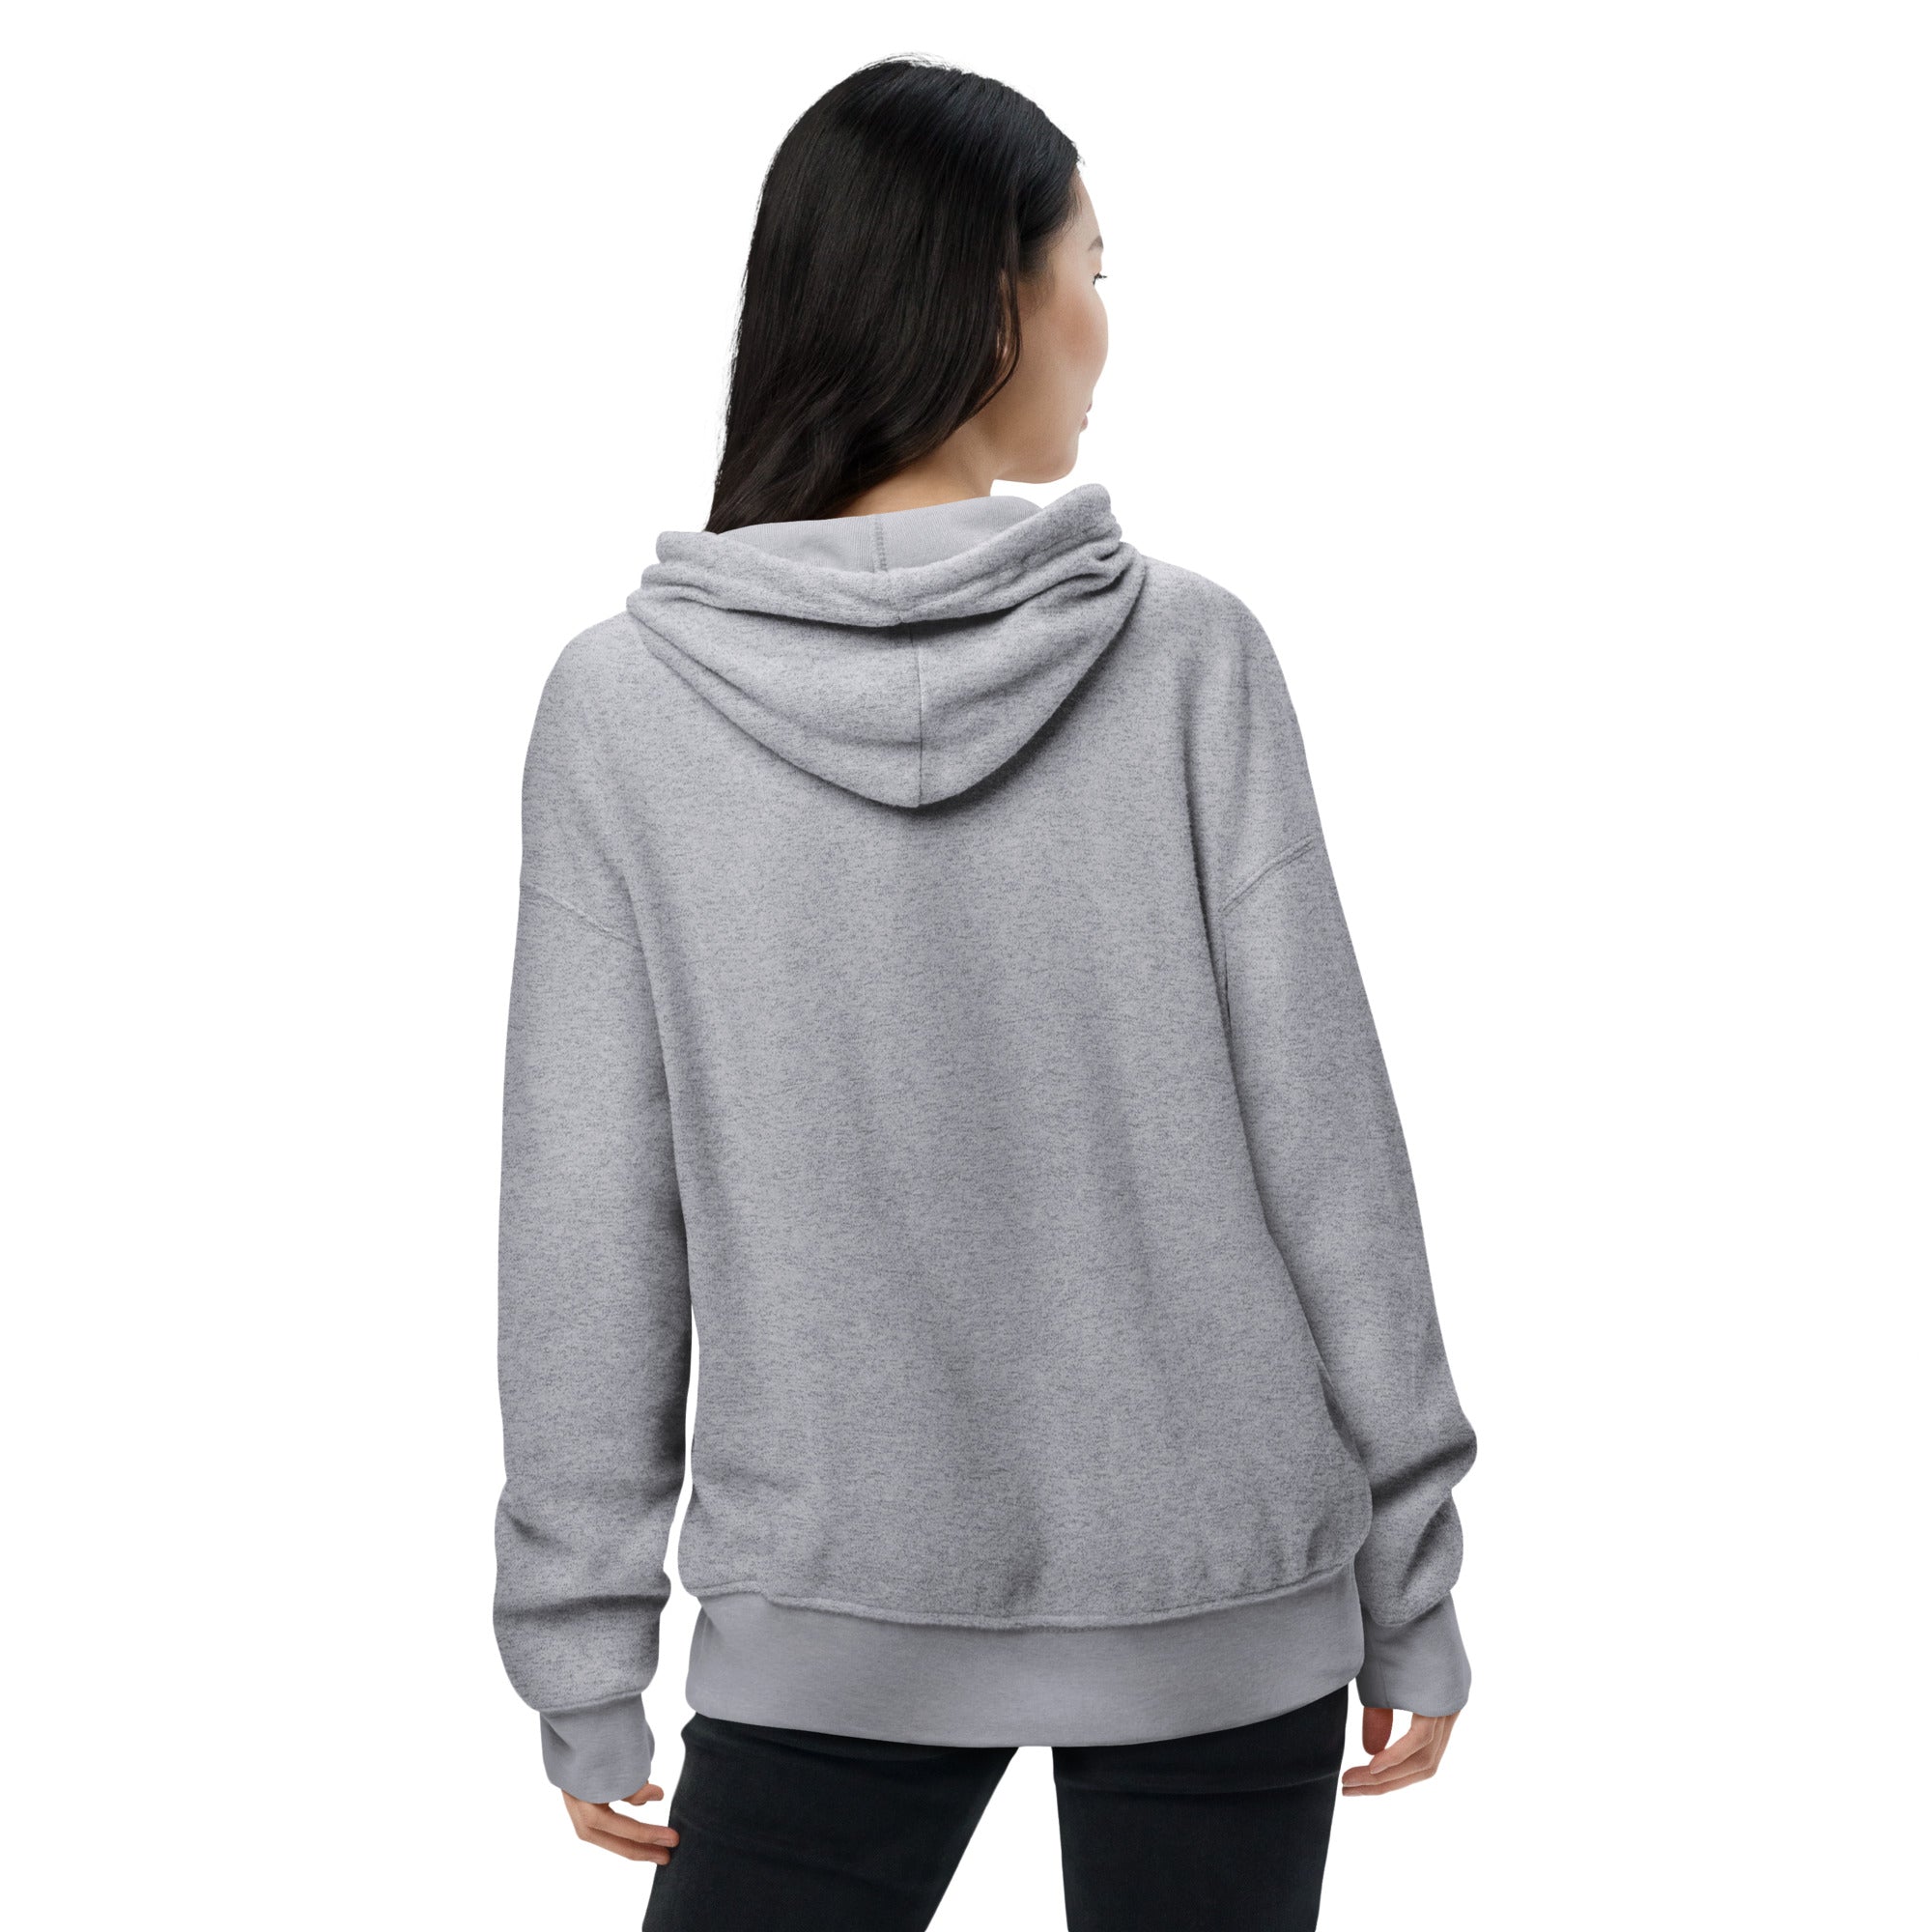 Unisex sueded fleece yoga hoodie - Personal Hour for Yoga and Meditations 